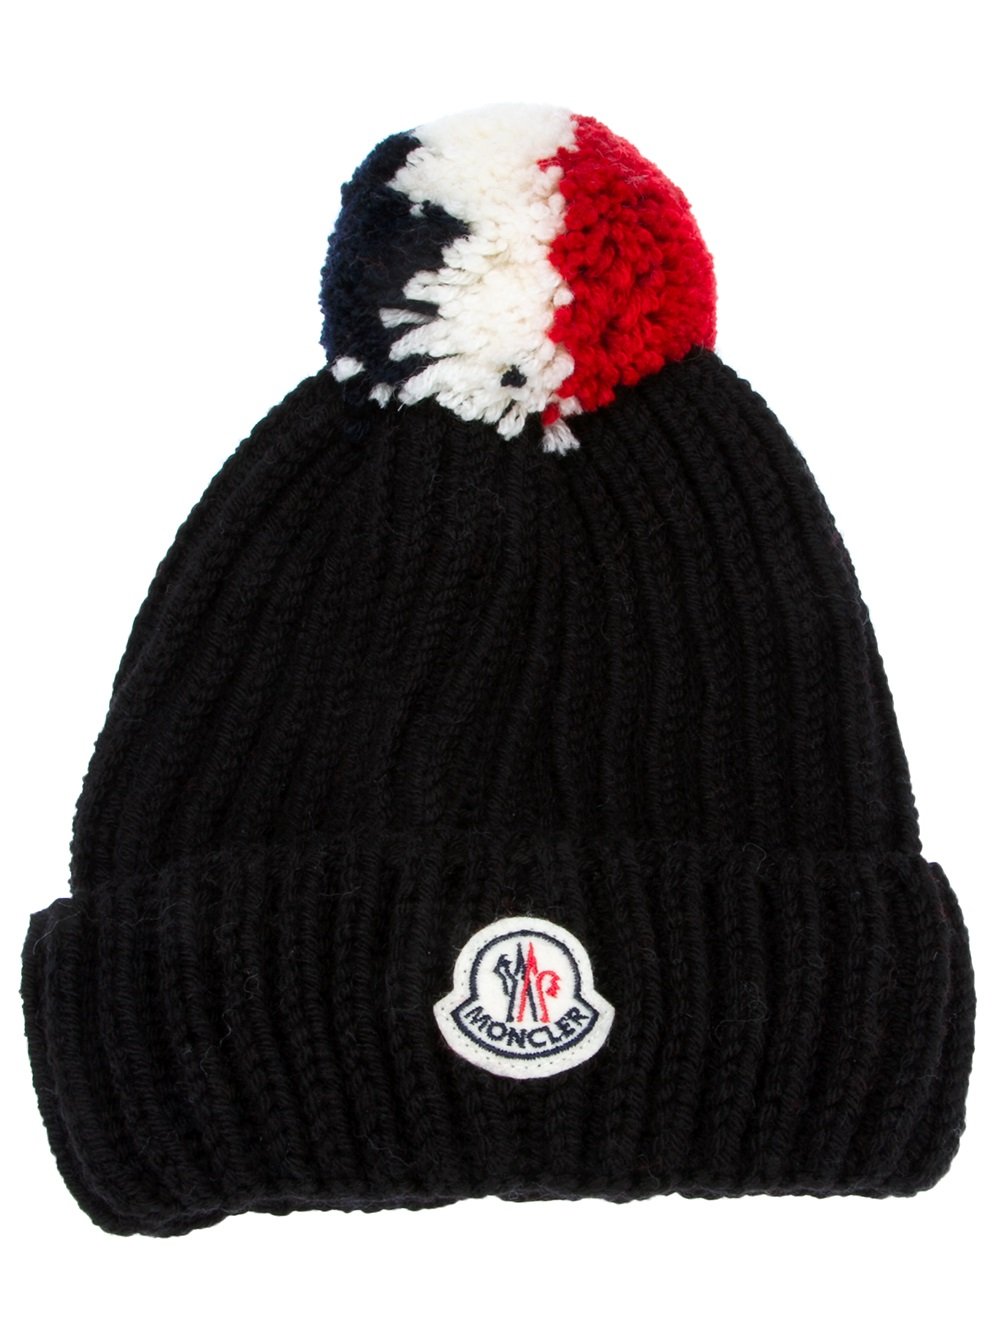 moncler hats mens | West of Rayleigh